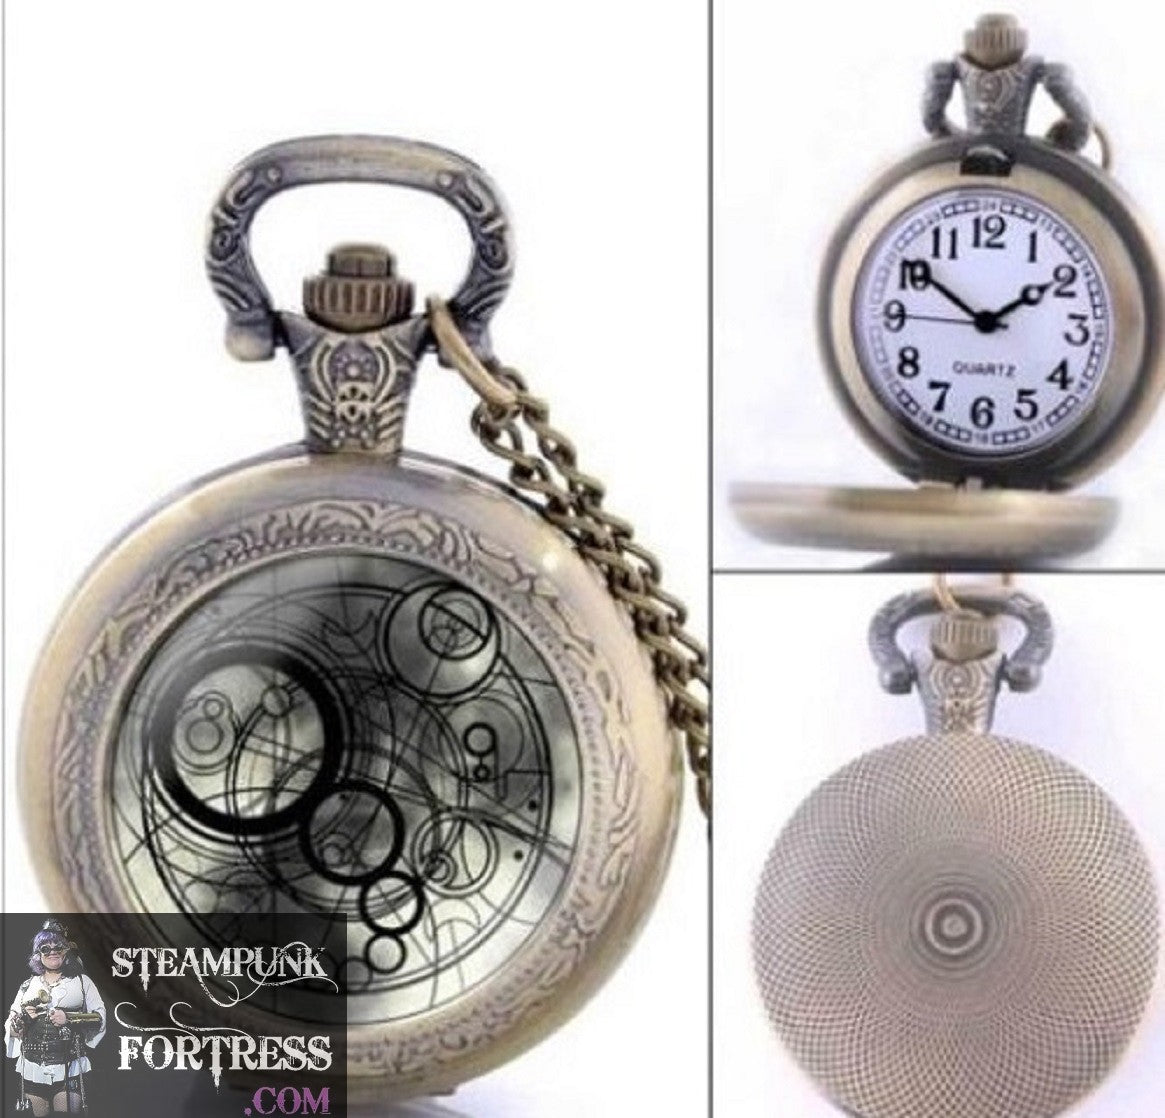 BRASS DOCTOR DR WHO HOME PLANET GALLIFREY WHITE WATCH SMALL WORKING POCKETWATCH POCKET WATCH WITH CHAIN AND CLASP - MASS PRODUCED